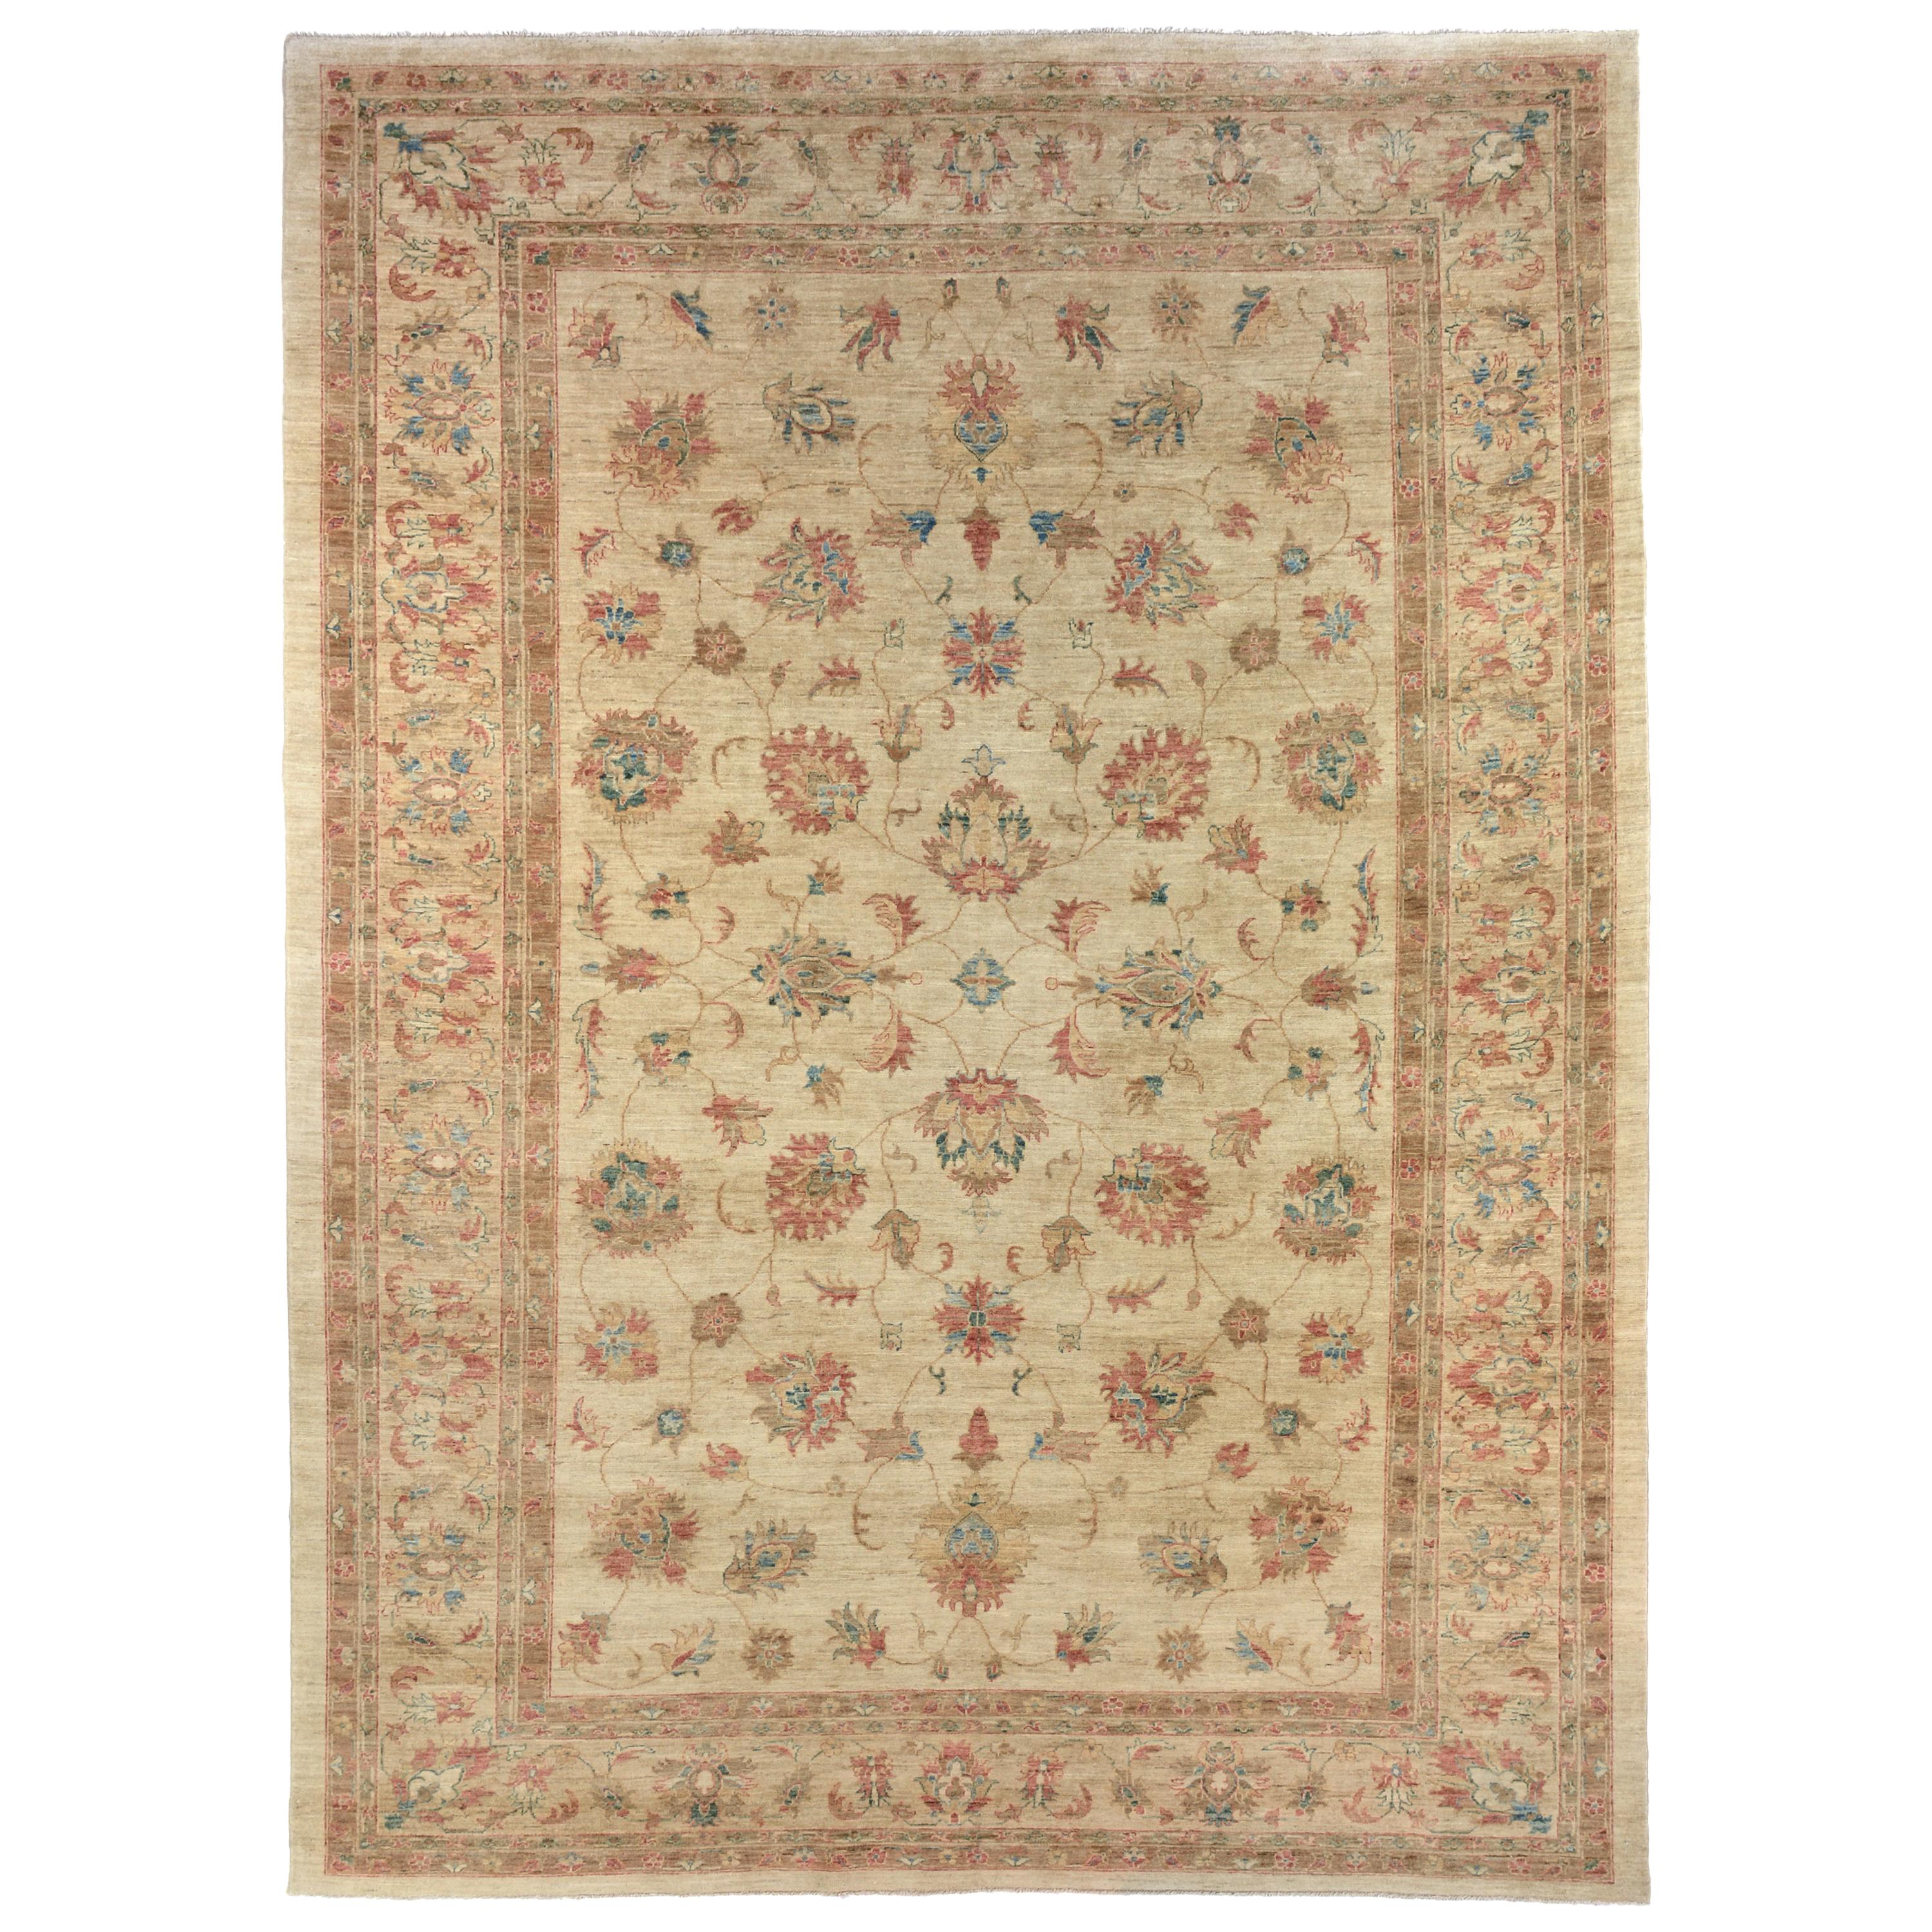 Golden Tan Floral Traditional Area Rug